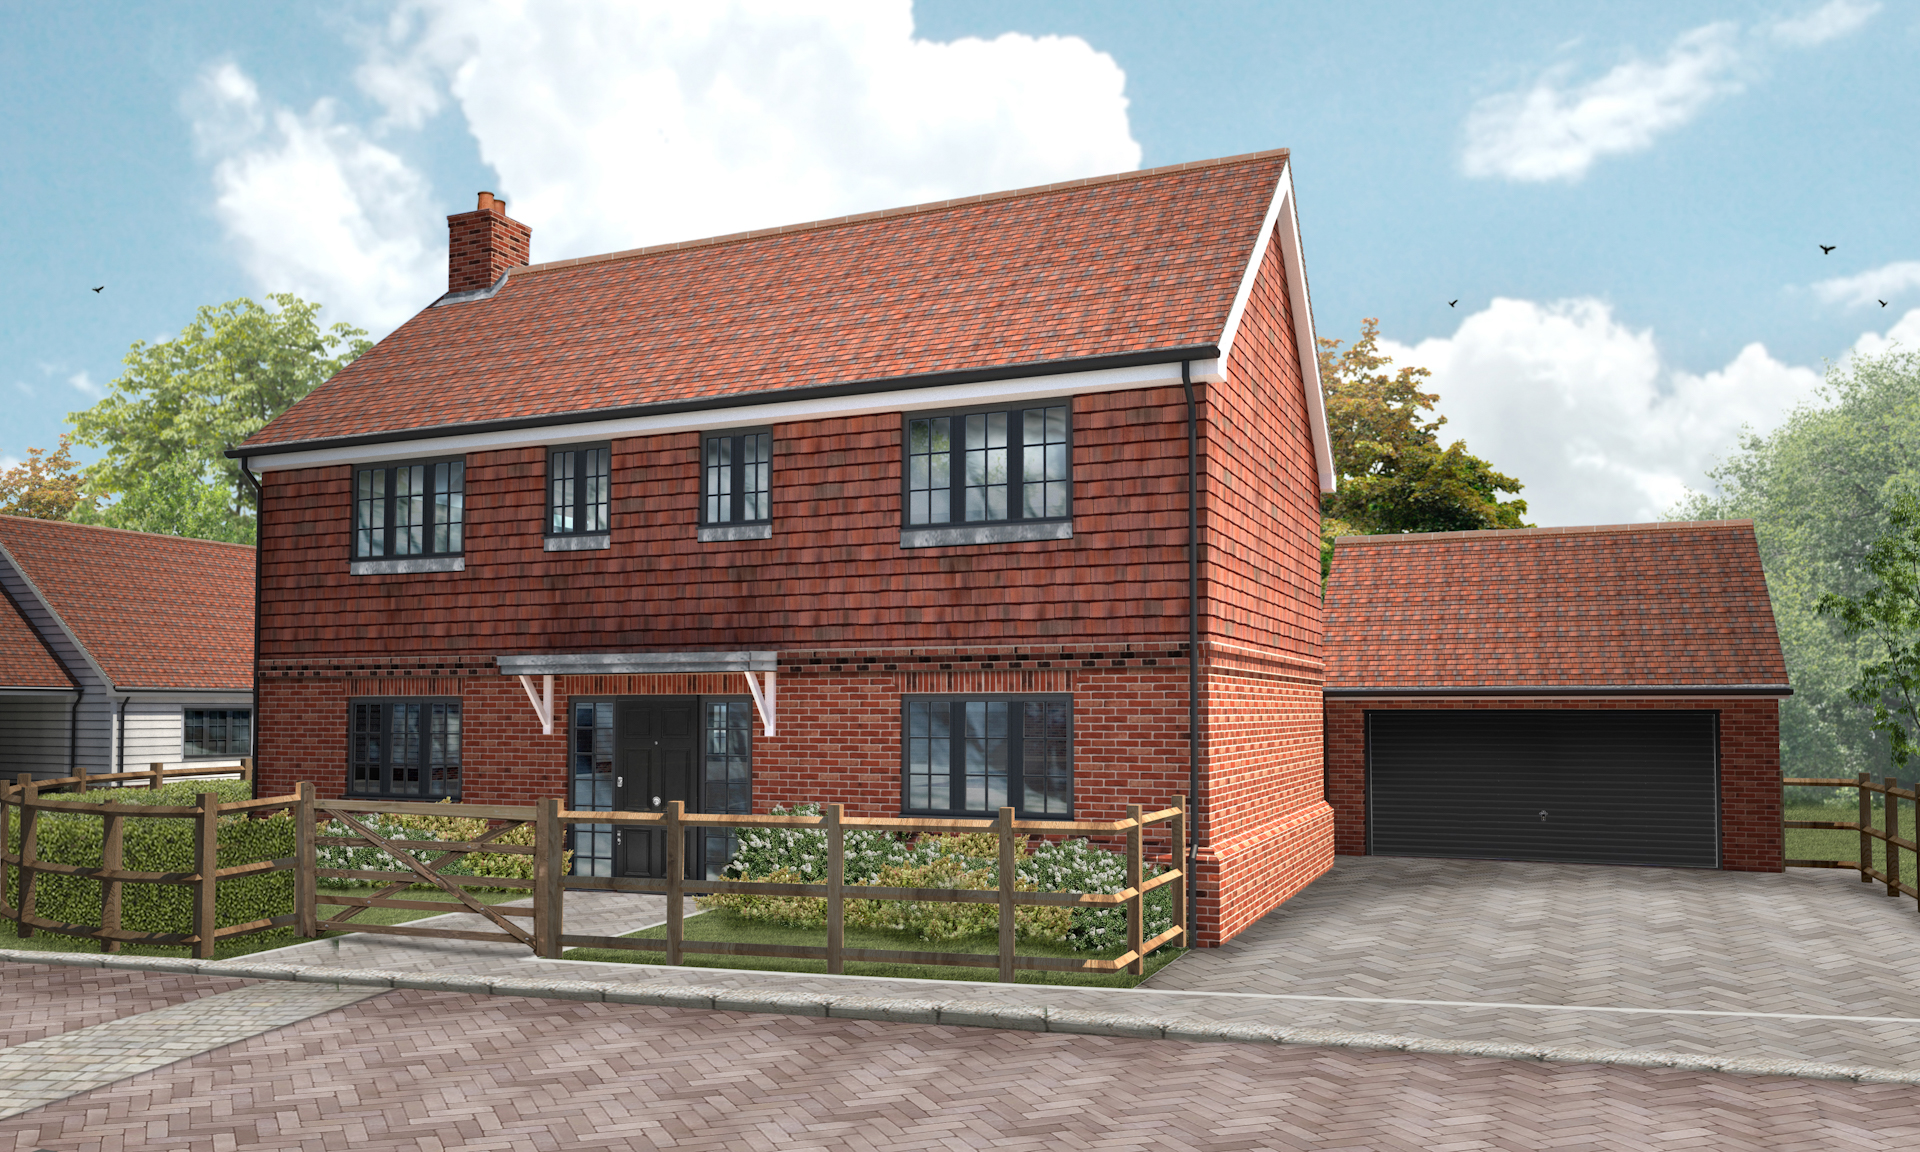 Plot 8 at Millers meadow.